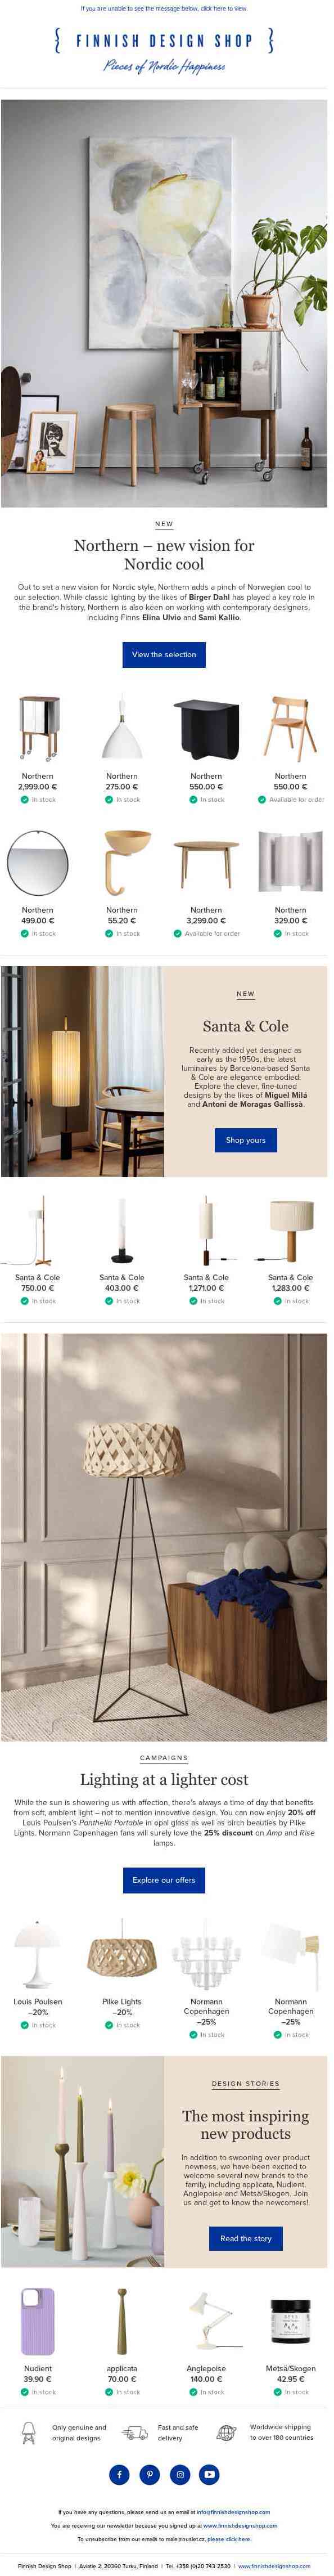 New brand: Northern | Up to 25% off lighting